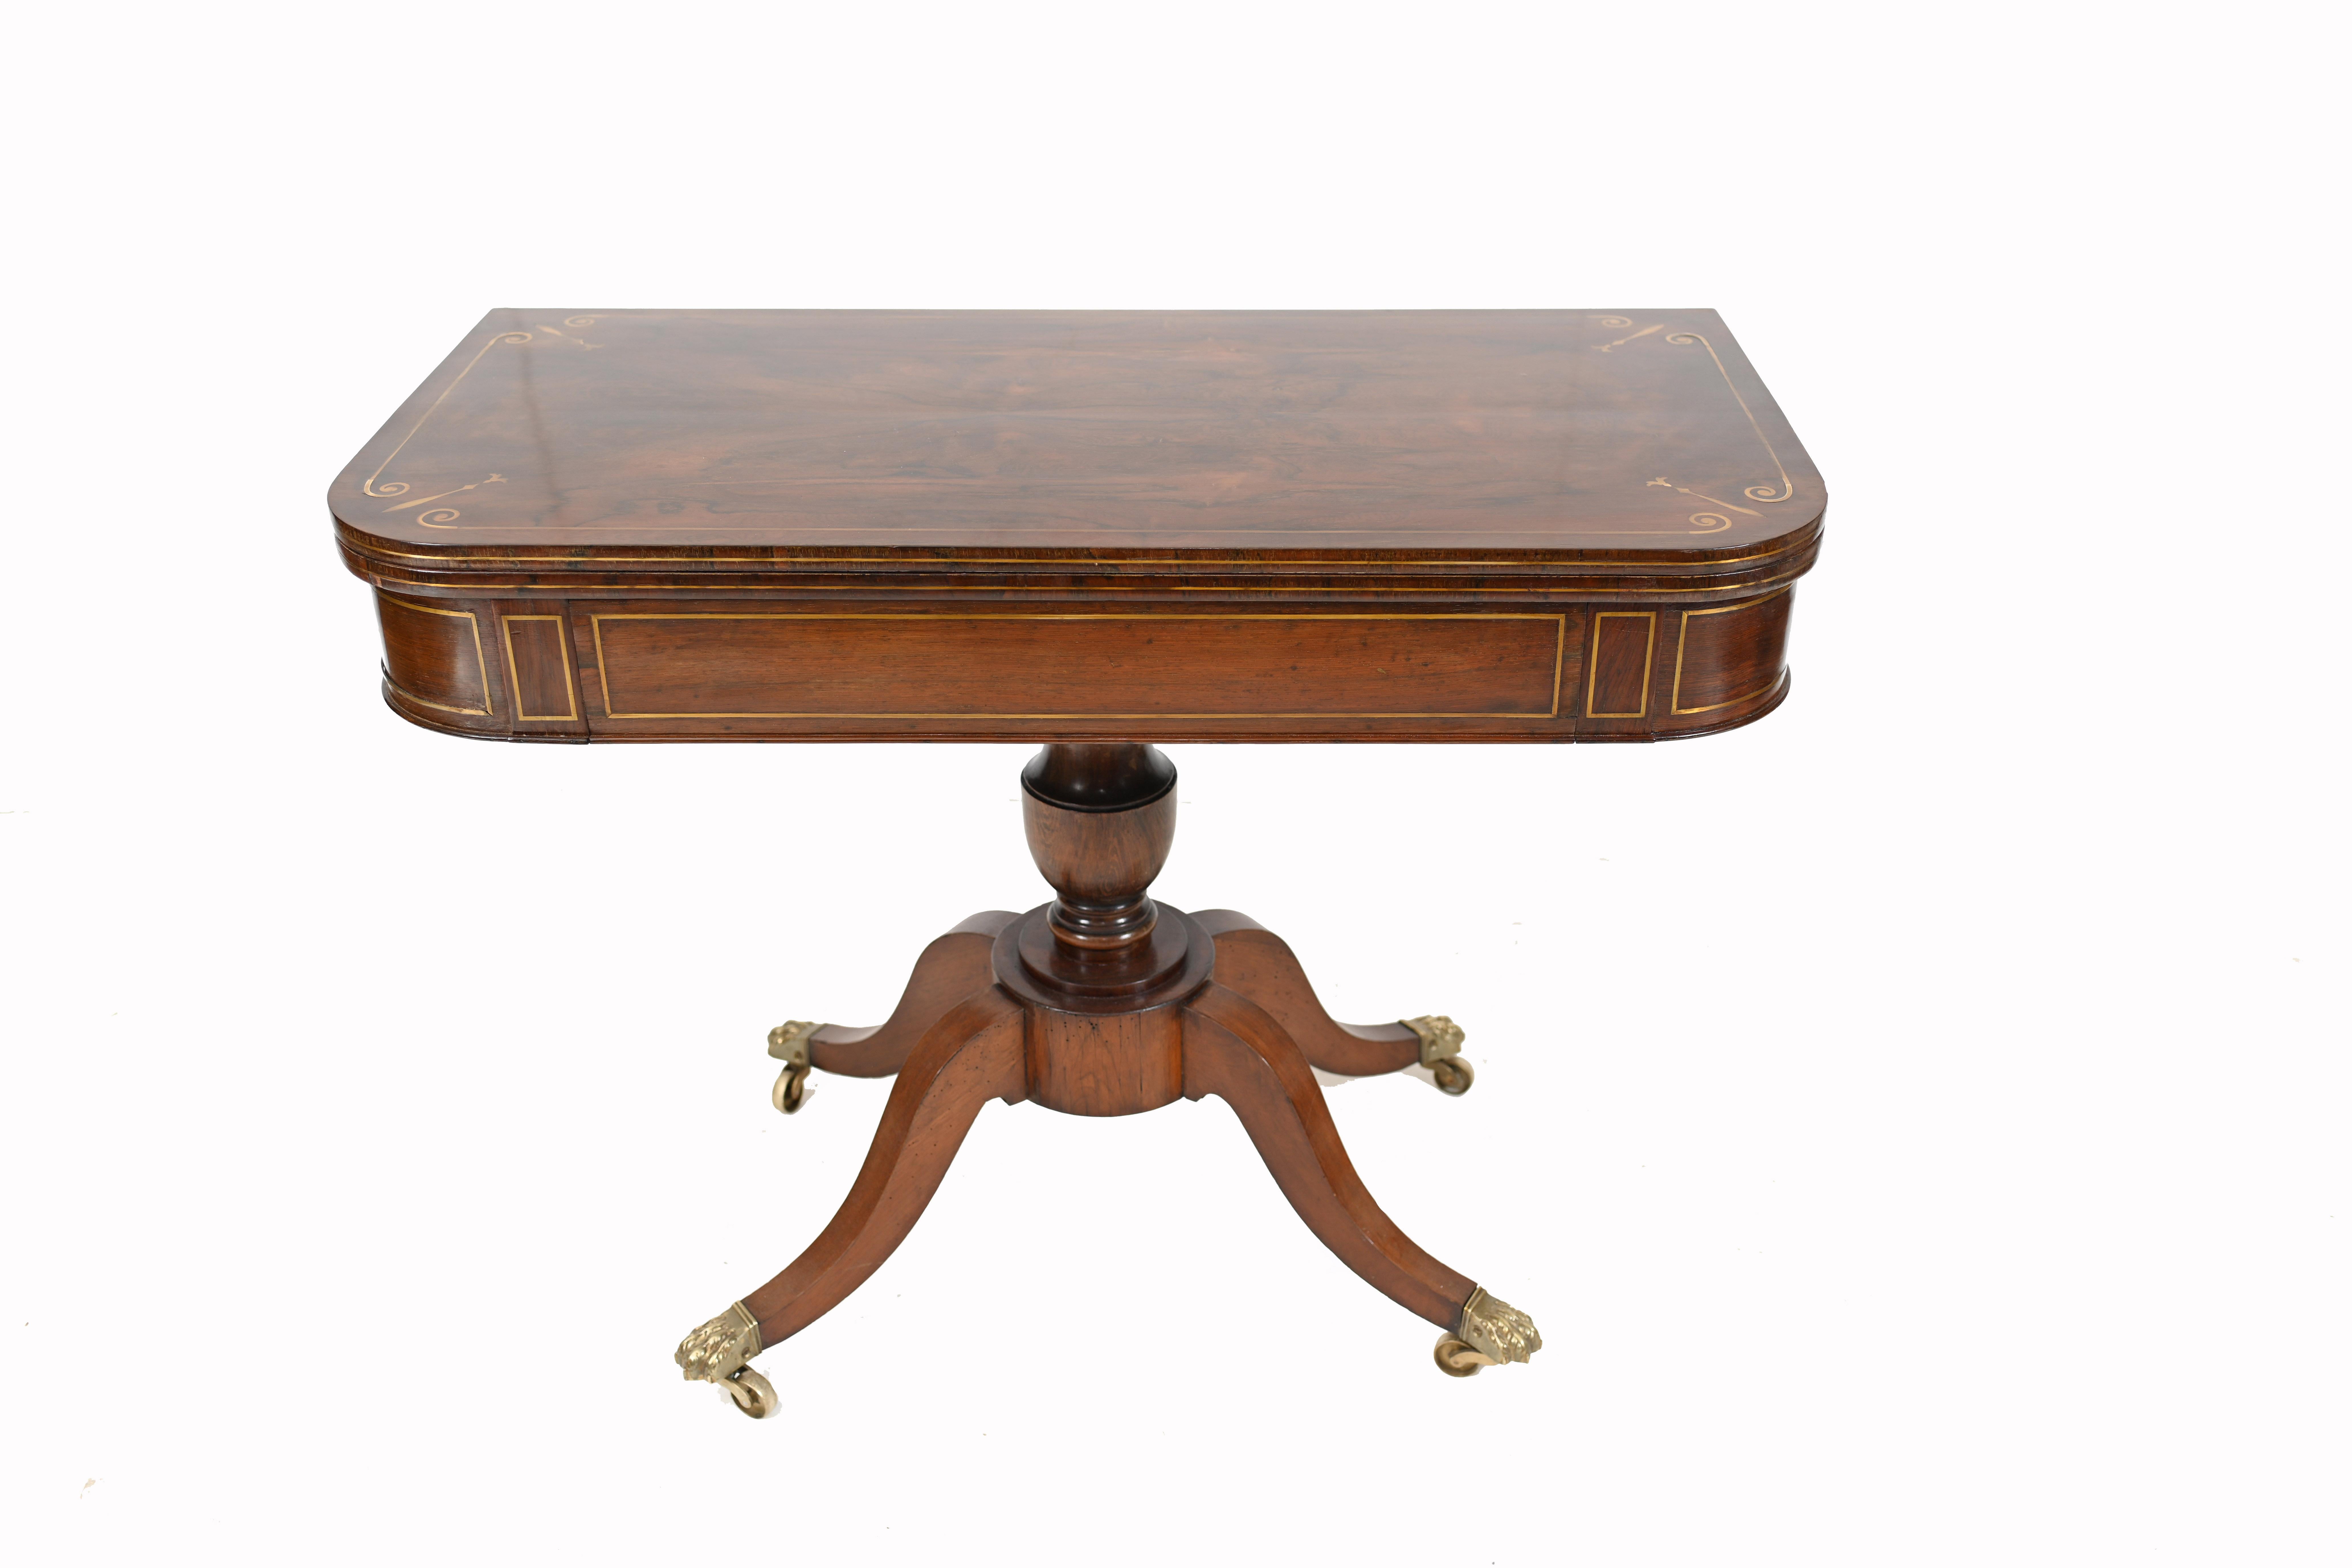 Classic period Regency card table in mahogany
Clean and minimal design with classical design authentically Regency
Circa 1820
Features brass inlay work
Top opens out to reveal green beize lined playing surface
Offered in great shape ready for